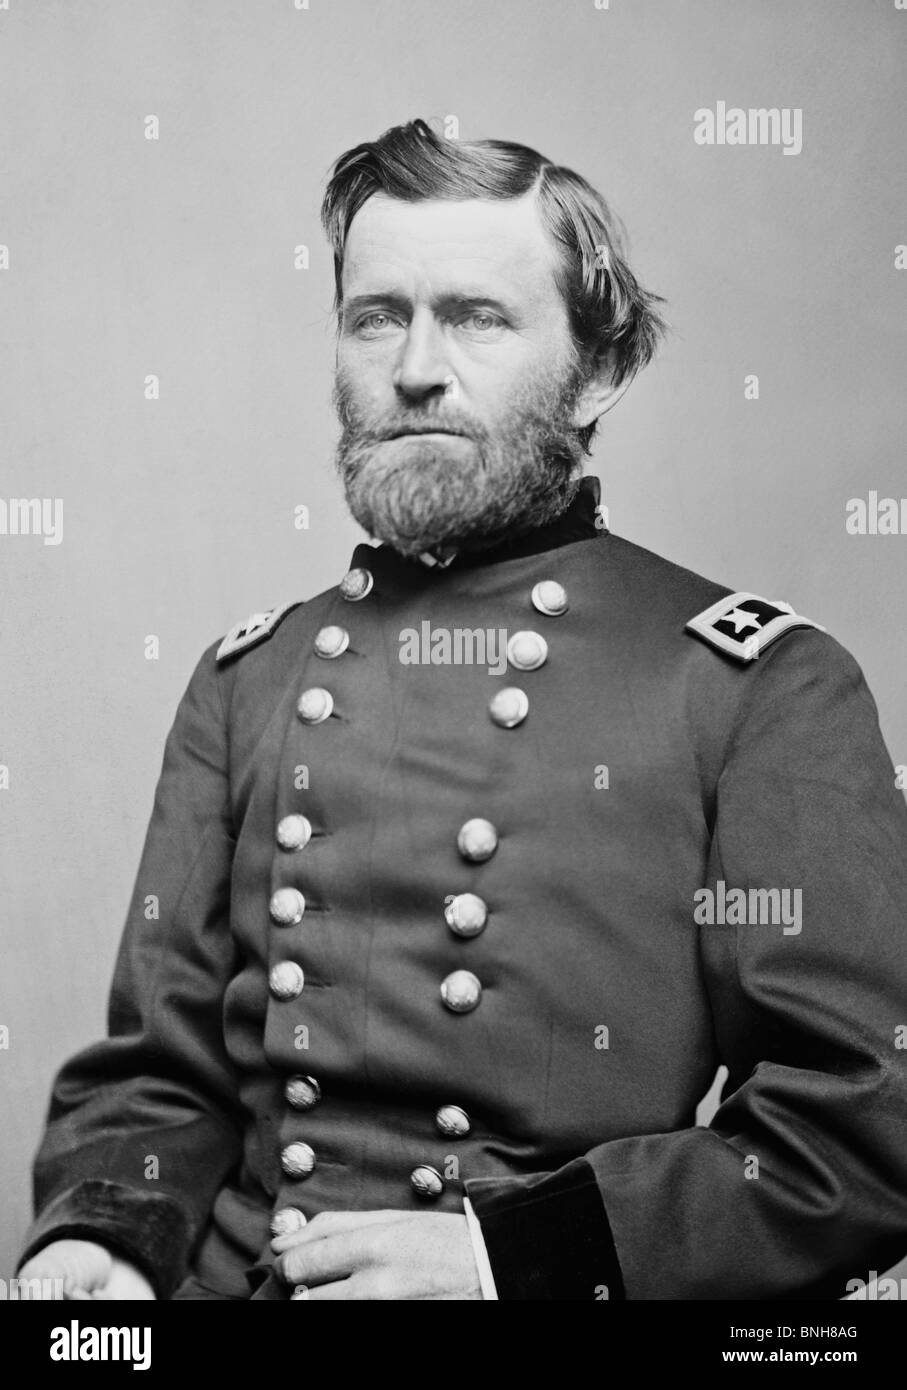 Grant,1822-1885,President of the United States,Commanding General Ulyesses S